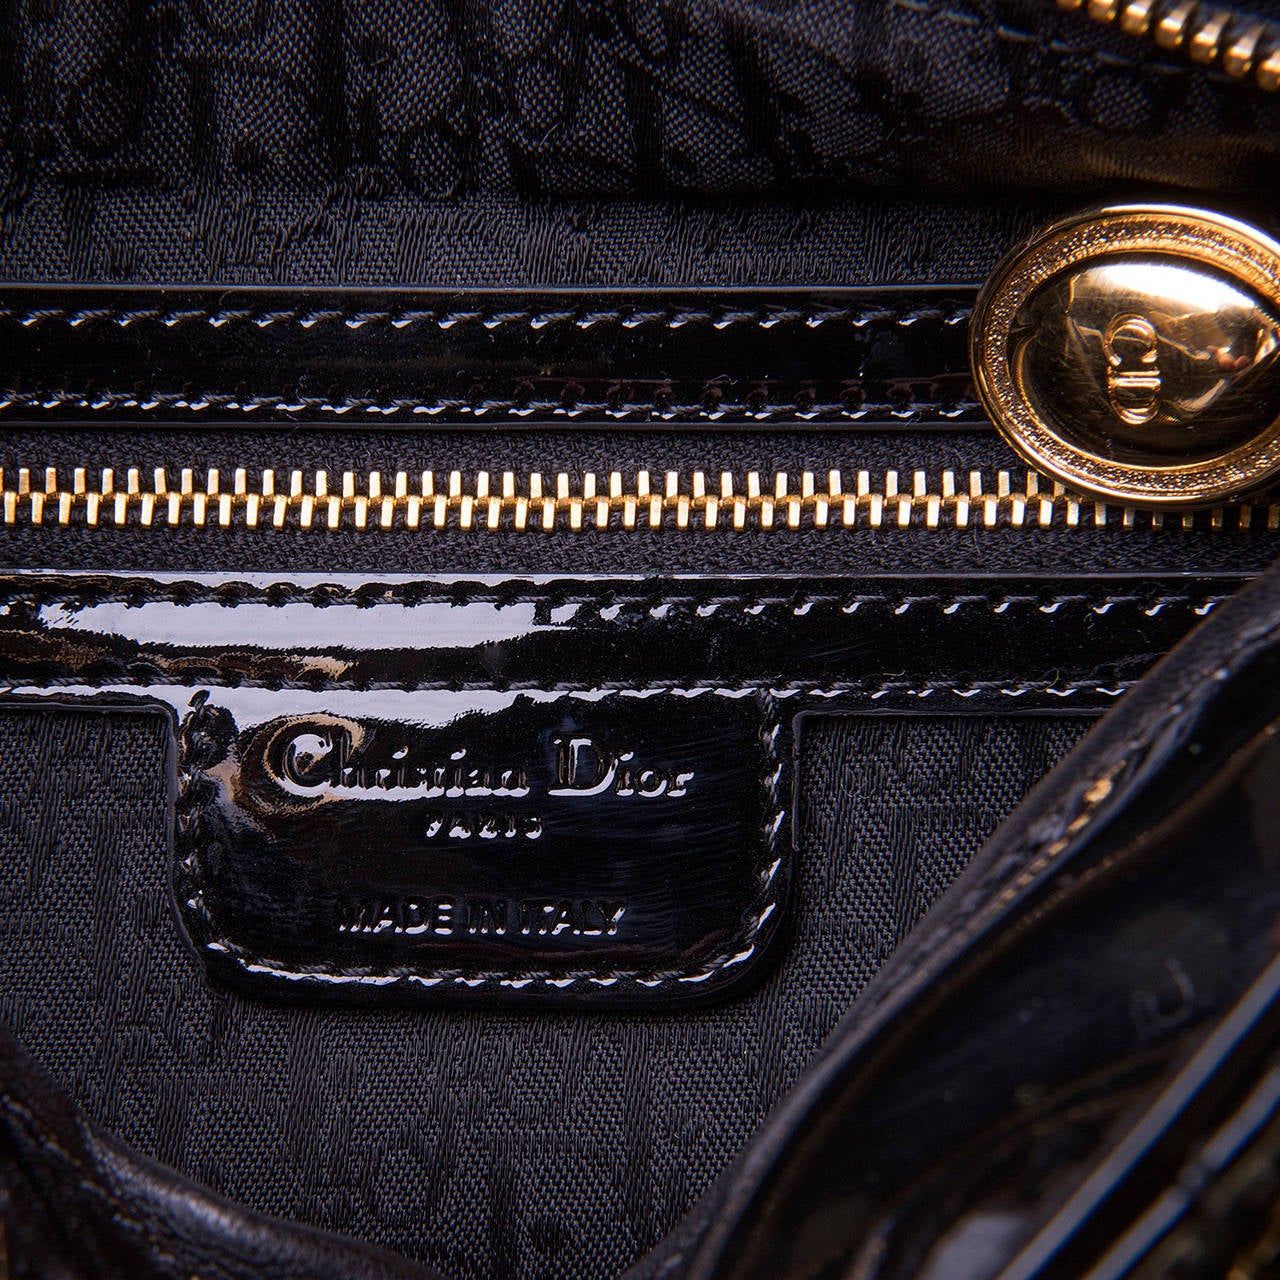 A WOW! 'Lady Dior' Bag, Black Patent Leather & Gold Hardware 1